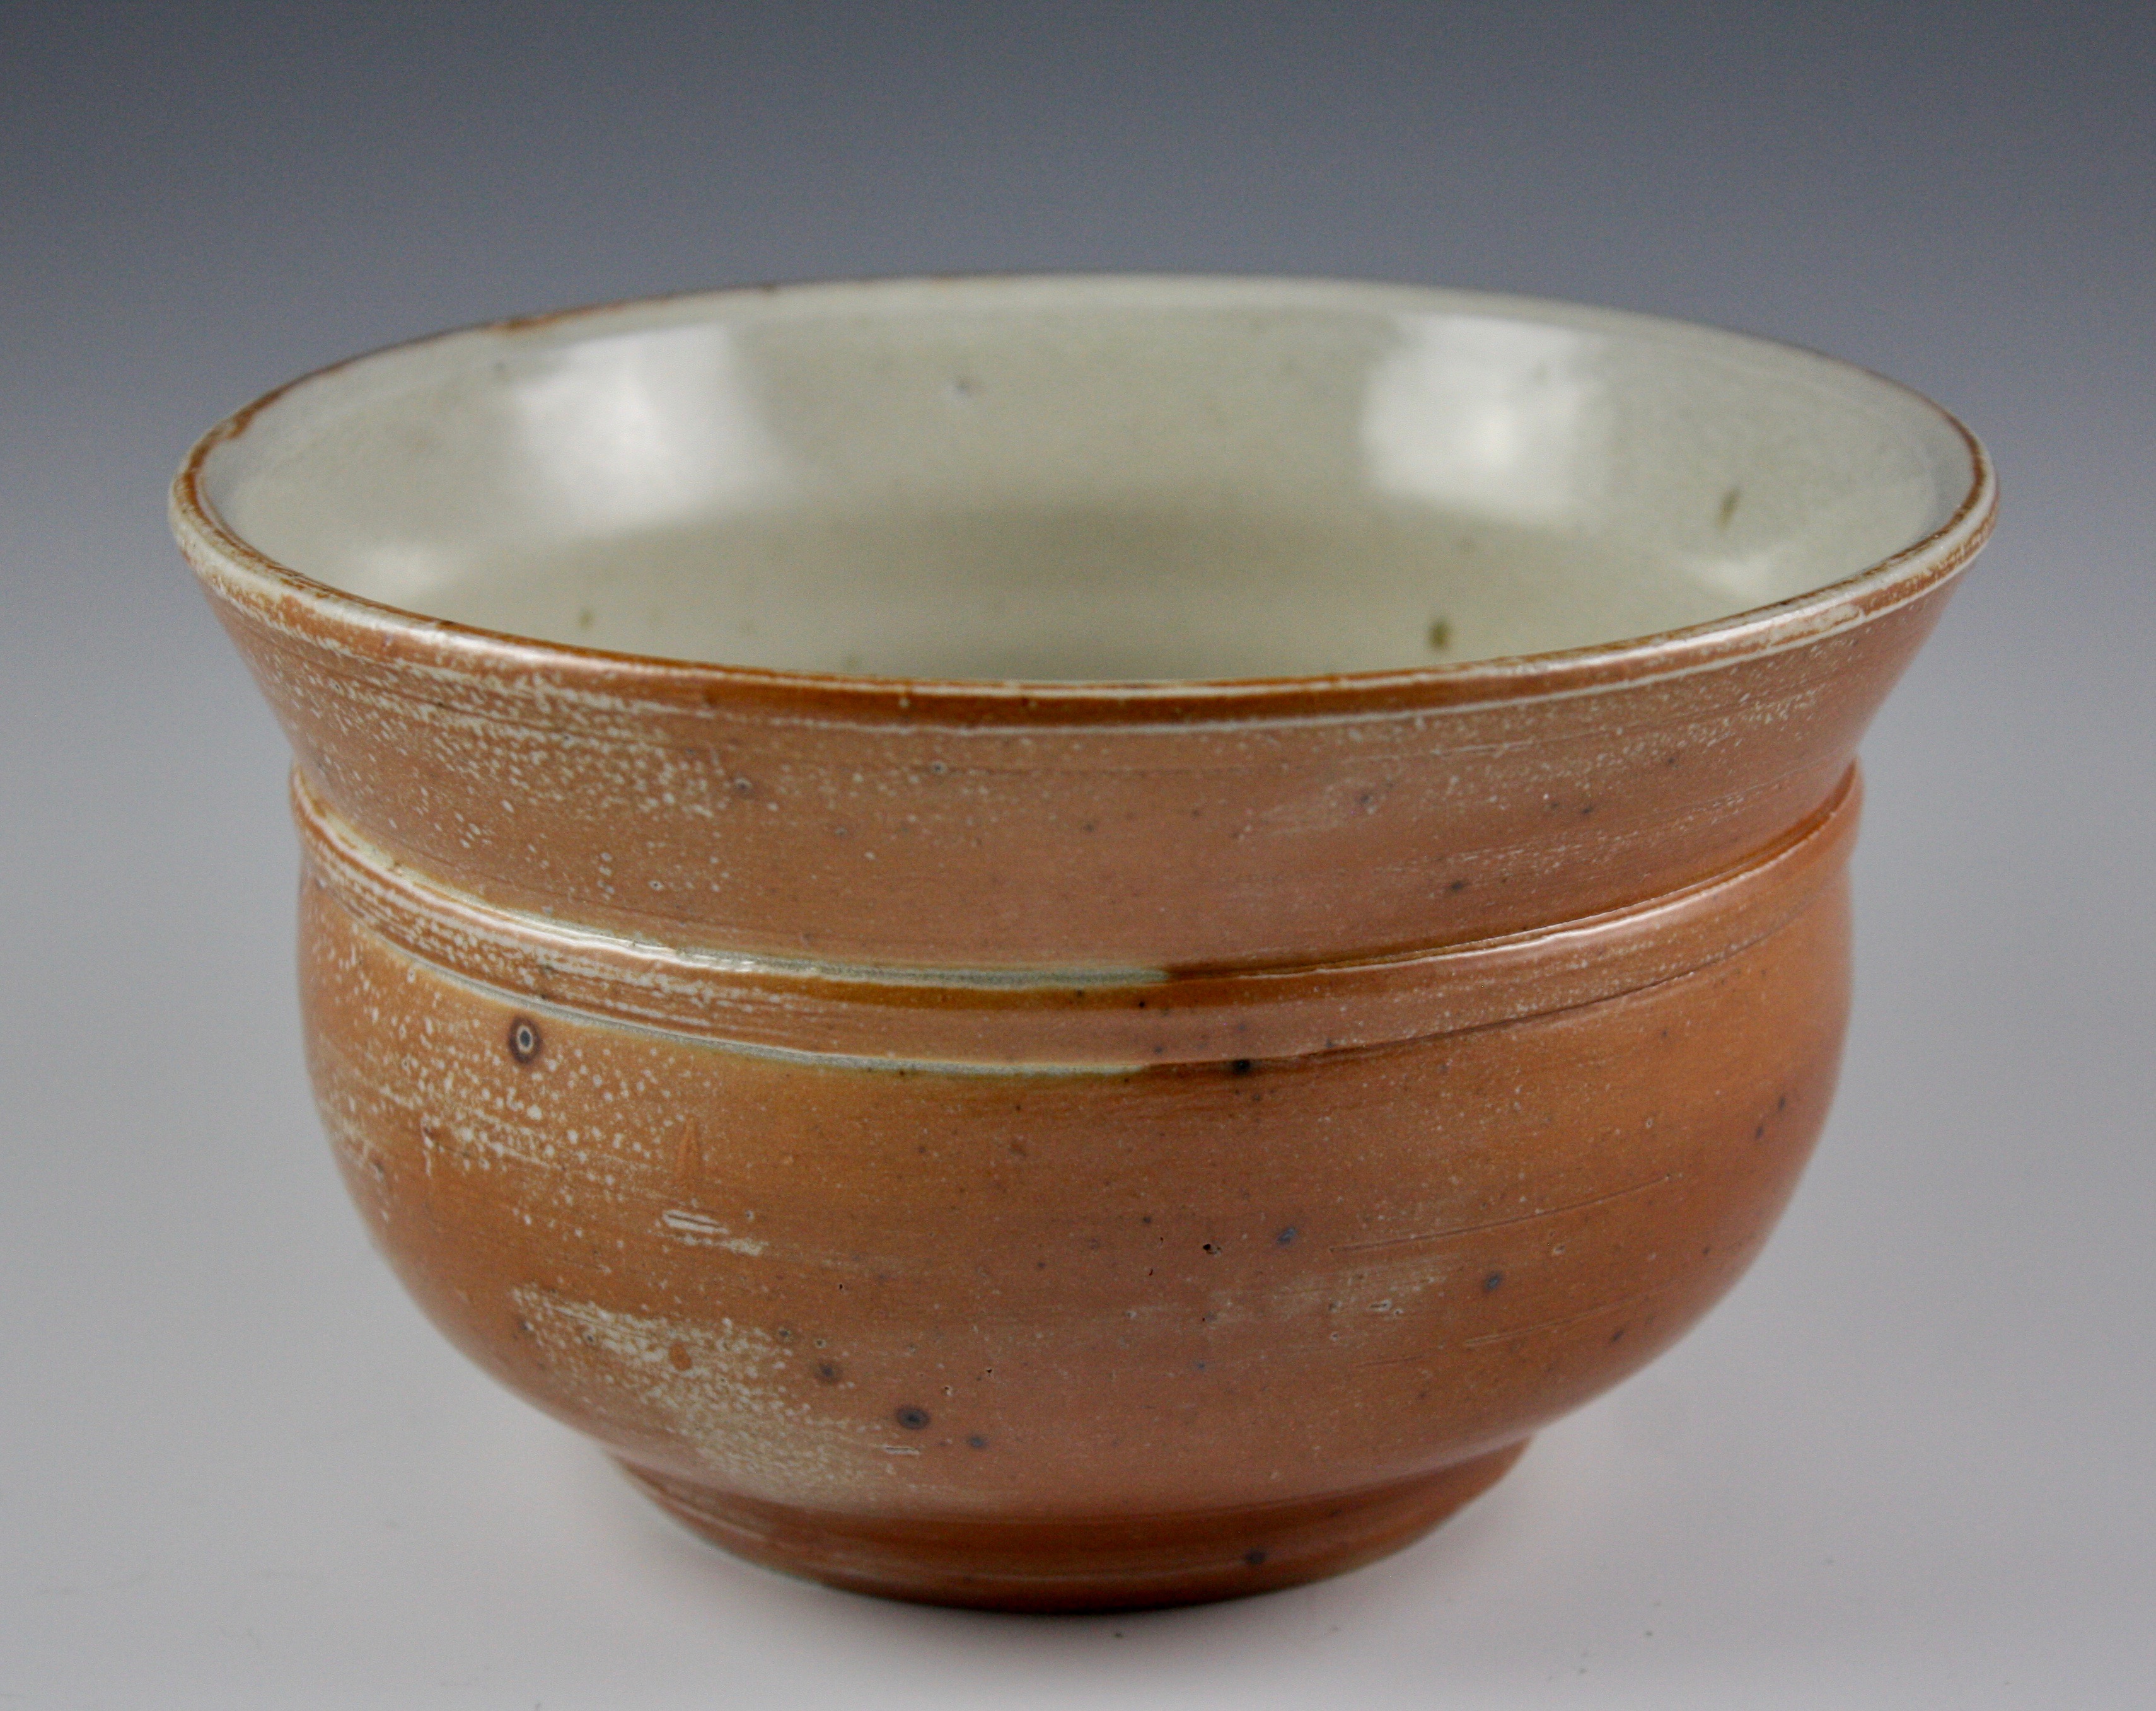 Spittoon-Shaped Bowl #22